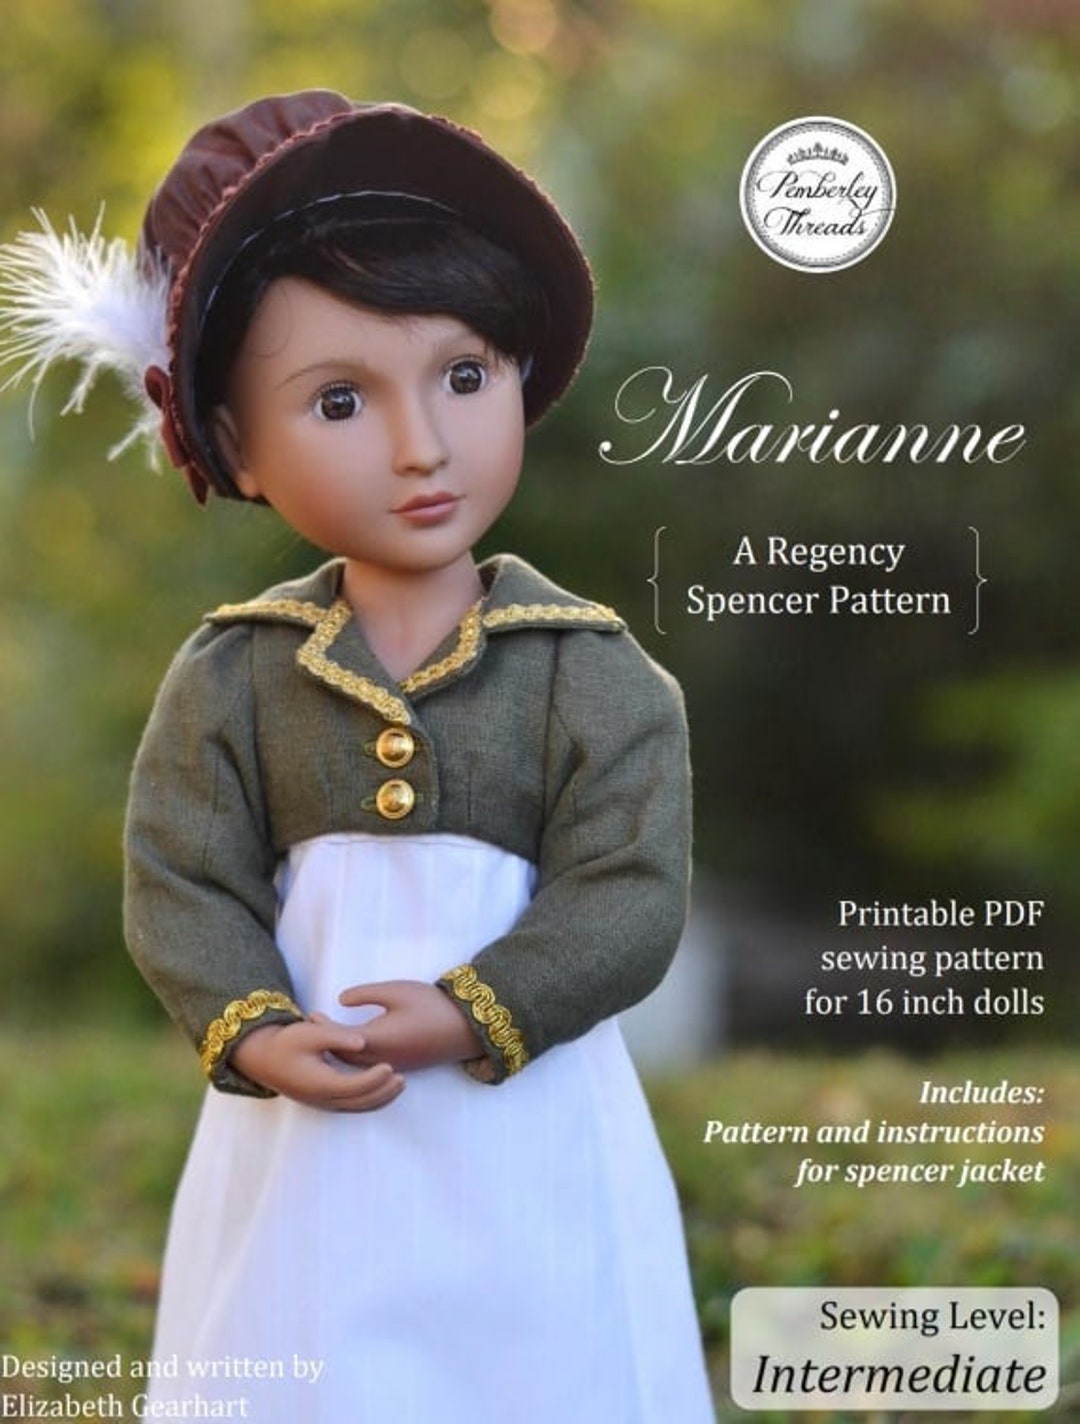 Clothing 100% made in France and eco-friendly. mARIANNE by Marie